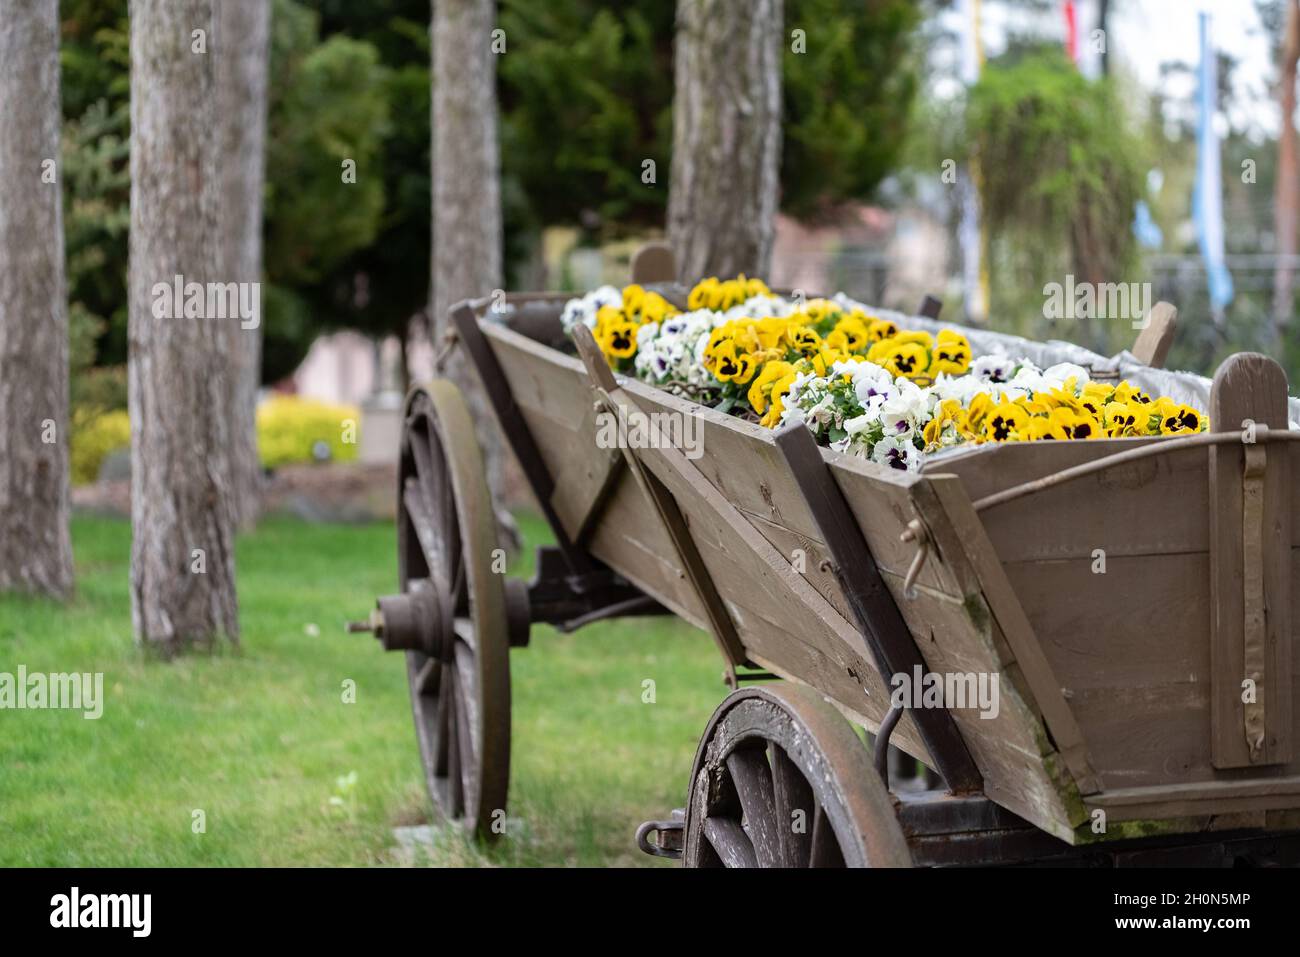 Pansies flowers, colorful plants on a wooden old cart. Lots of colorful flowers next to each other. Display of pansies. Stock Photo